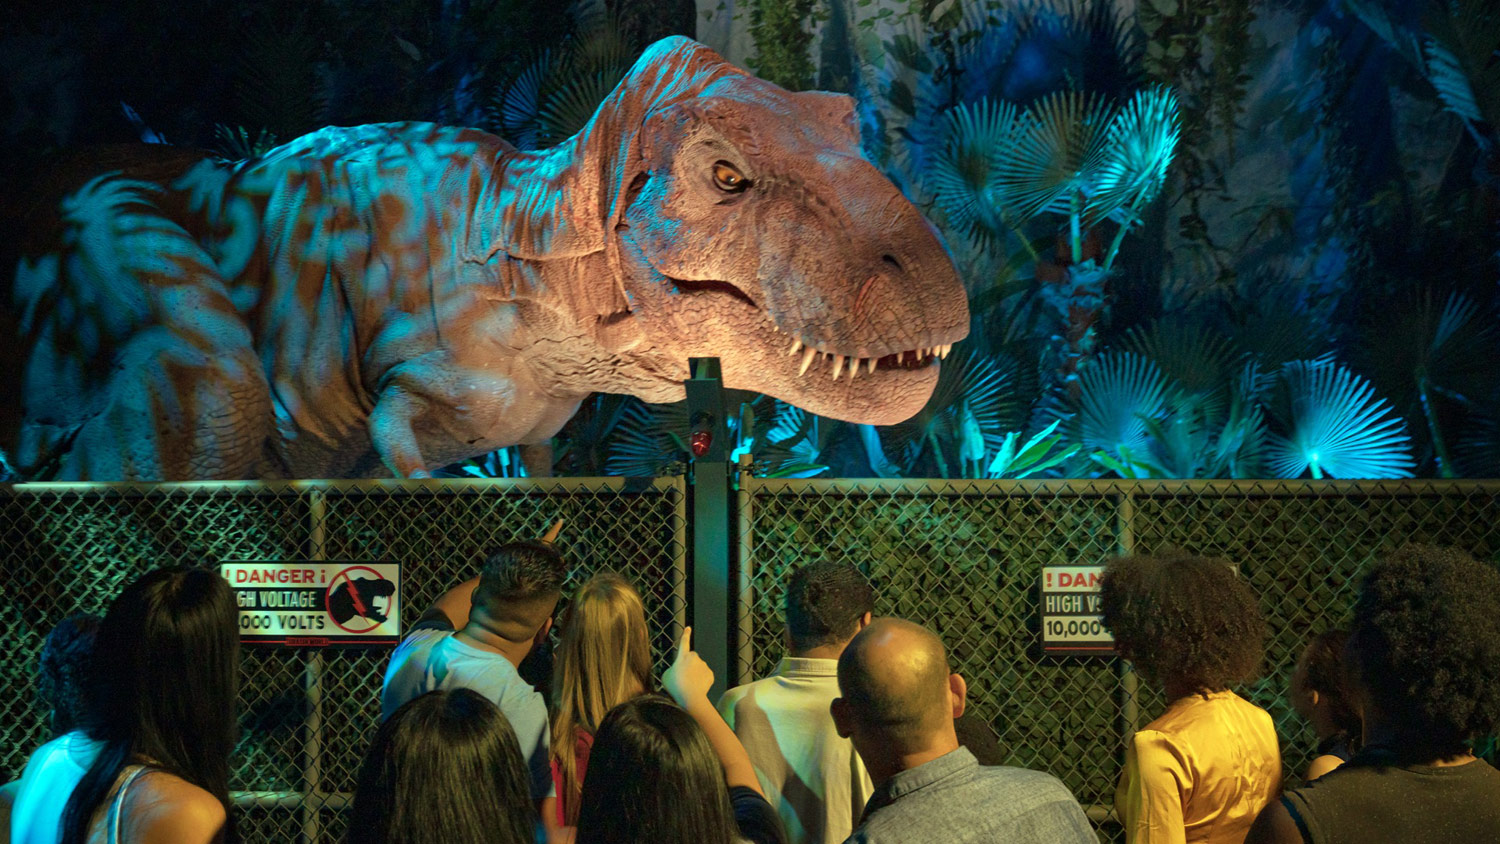 Jurassic World The Exhibition extended to January 3, 2024! « Celebrity Gossip and Movie News